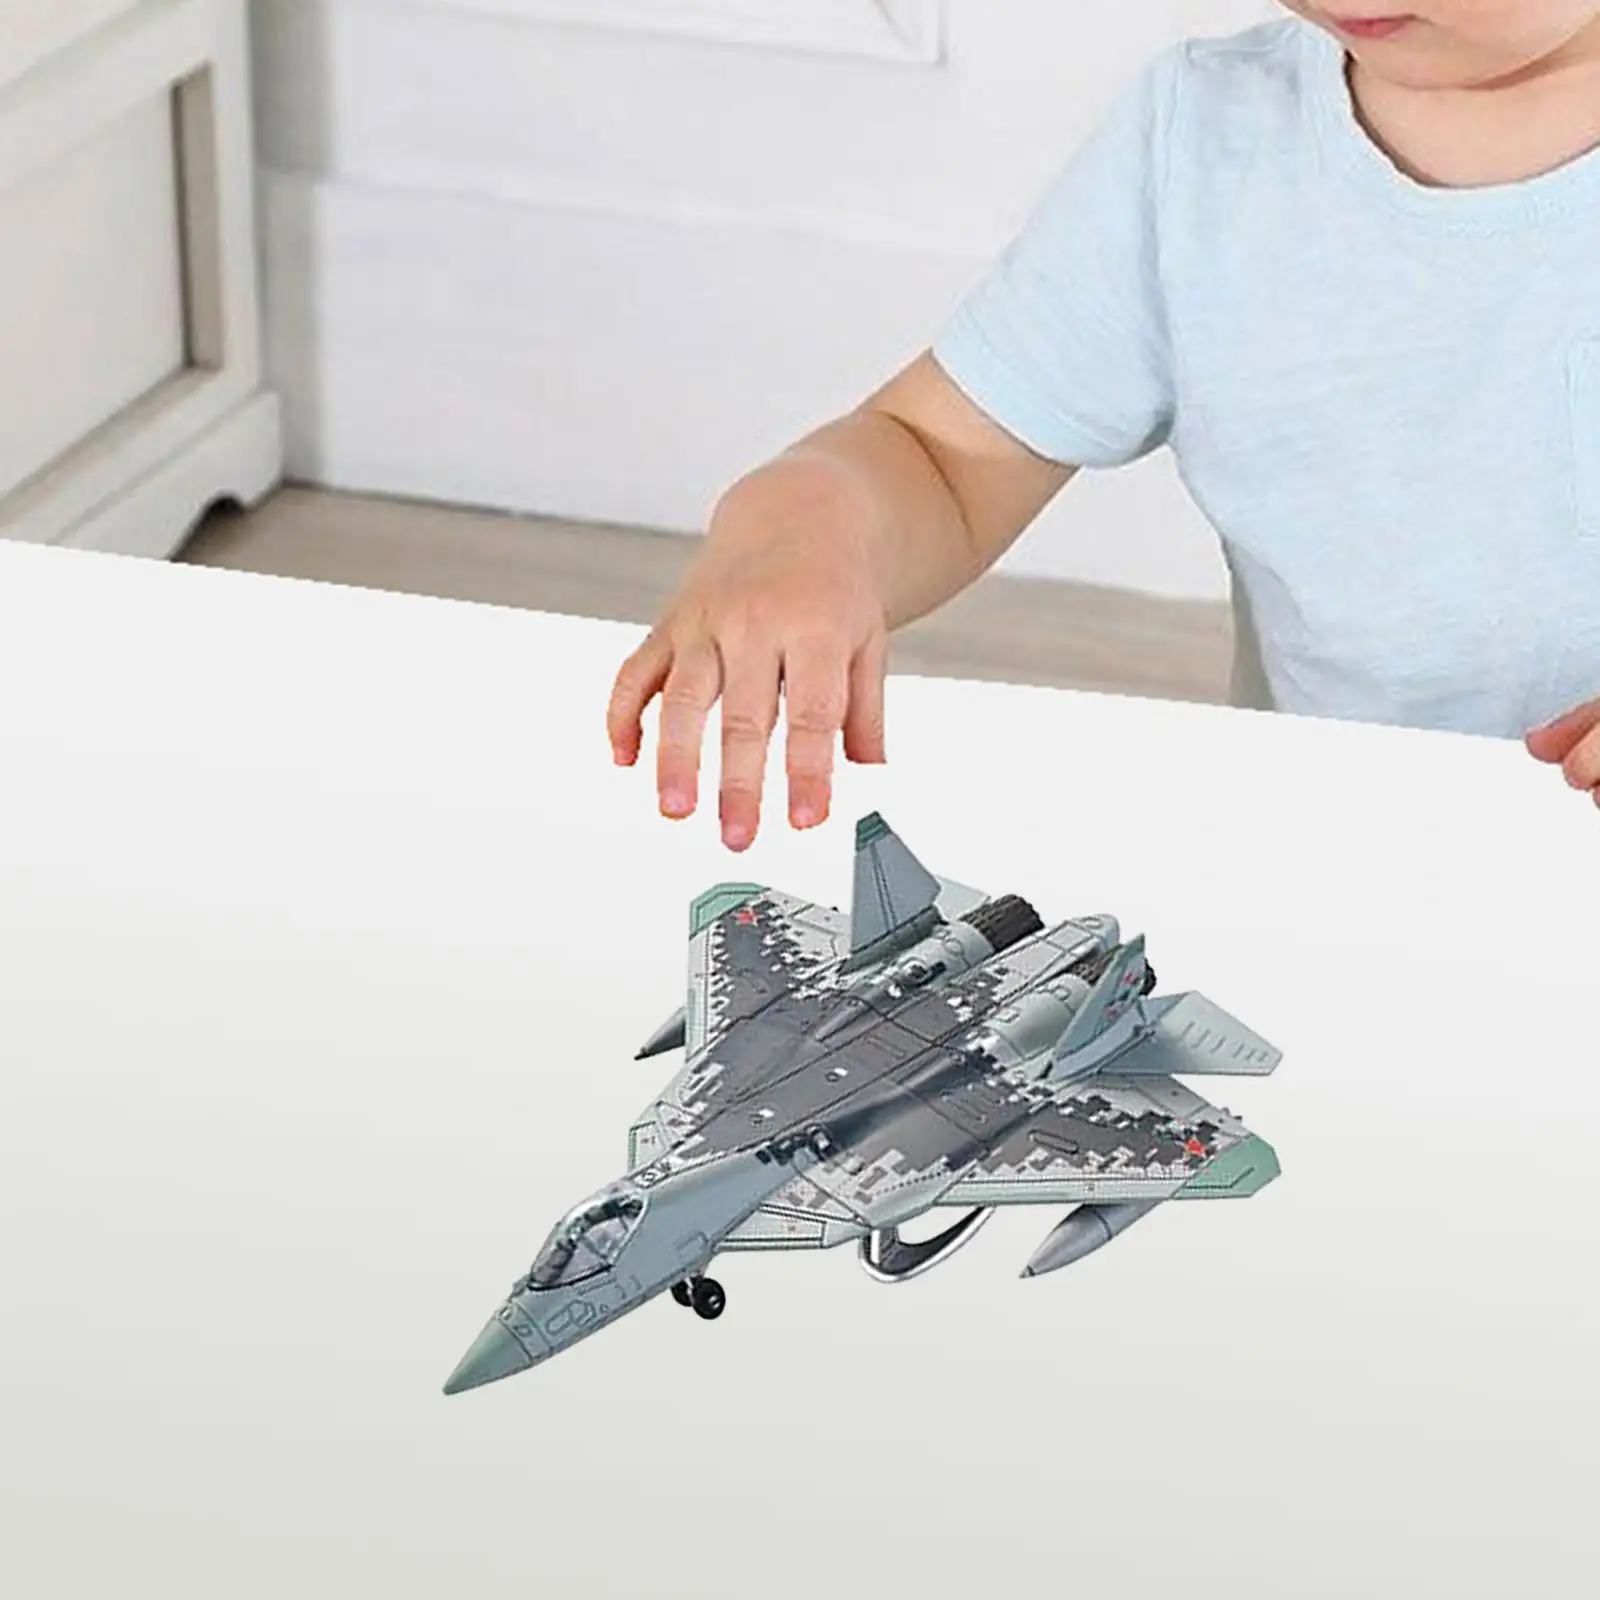 1/72 Fighter Attack Model DIY Assemble Party Favors Collection 3D Puzzle Brain Teaser for Children Boy Girls Kids Birthday Gift